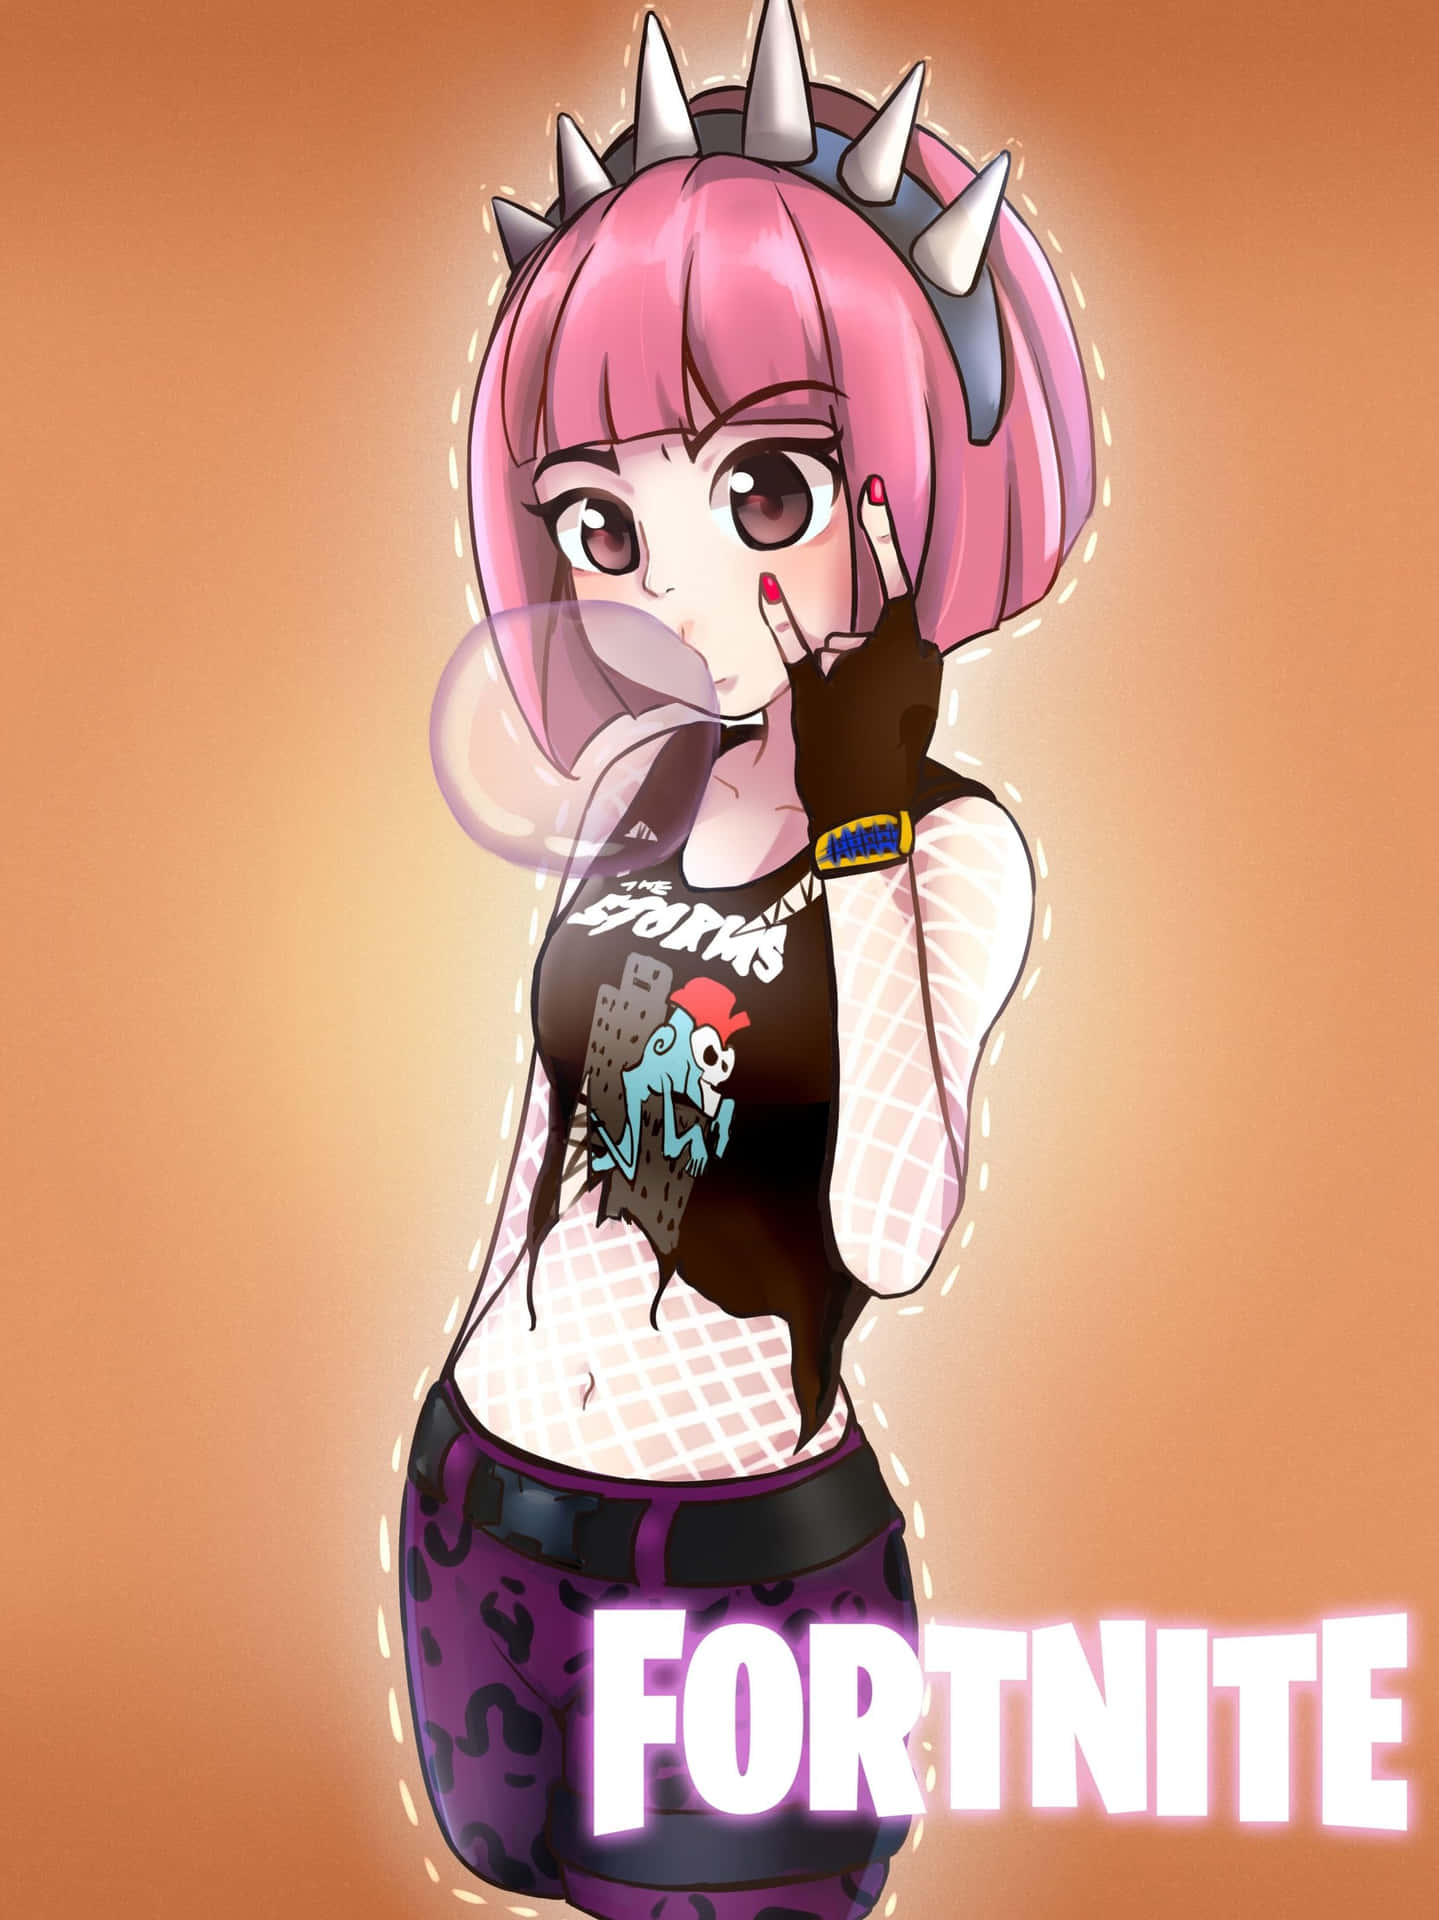 "Stay awesome and cute while playing Fortnite!" Wallpaper